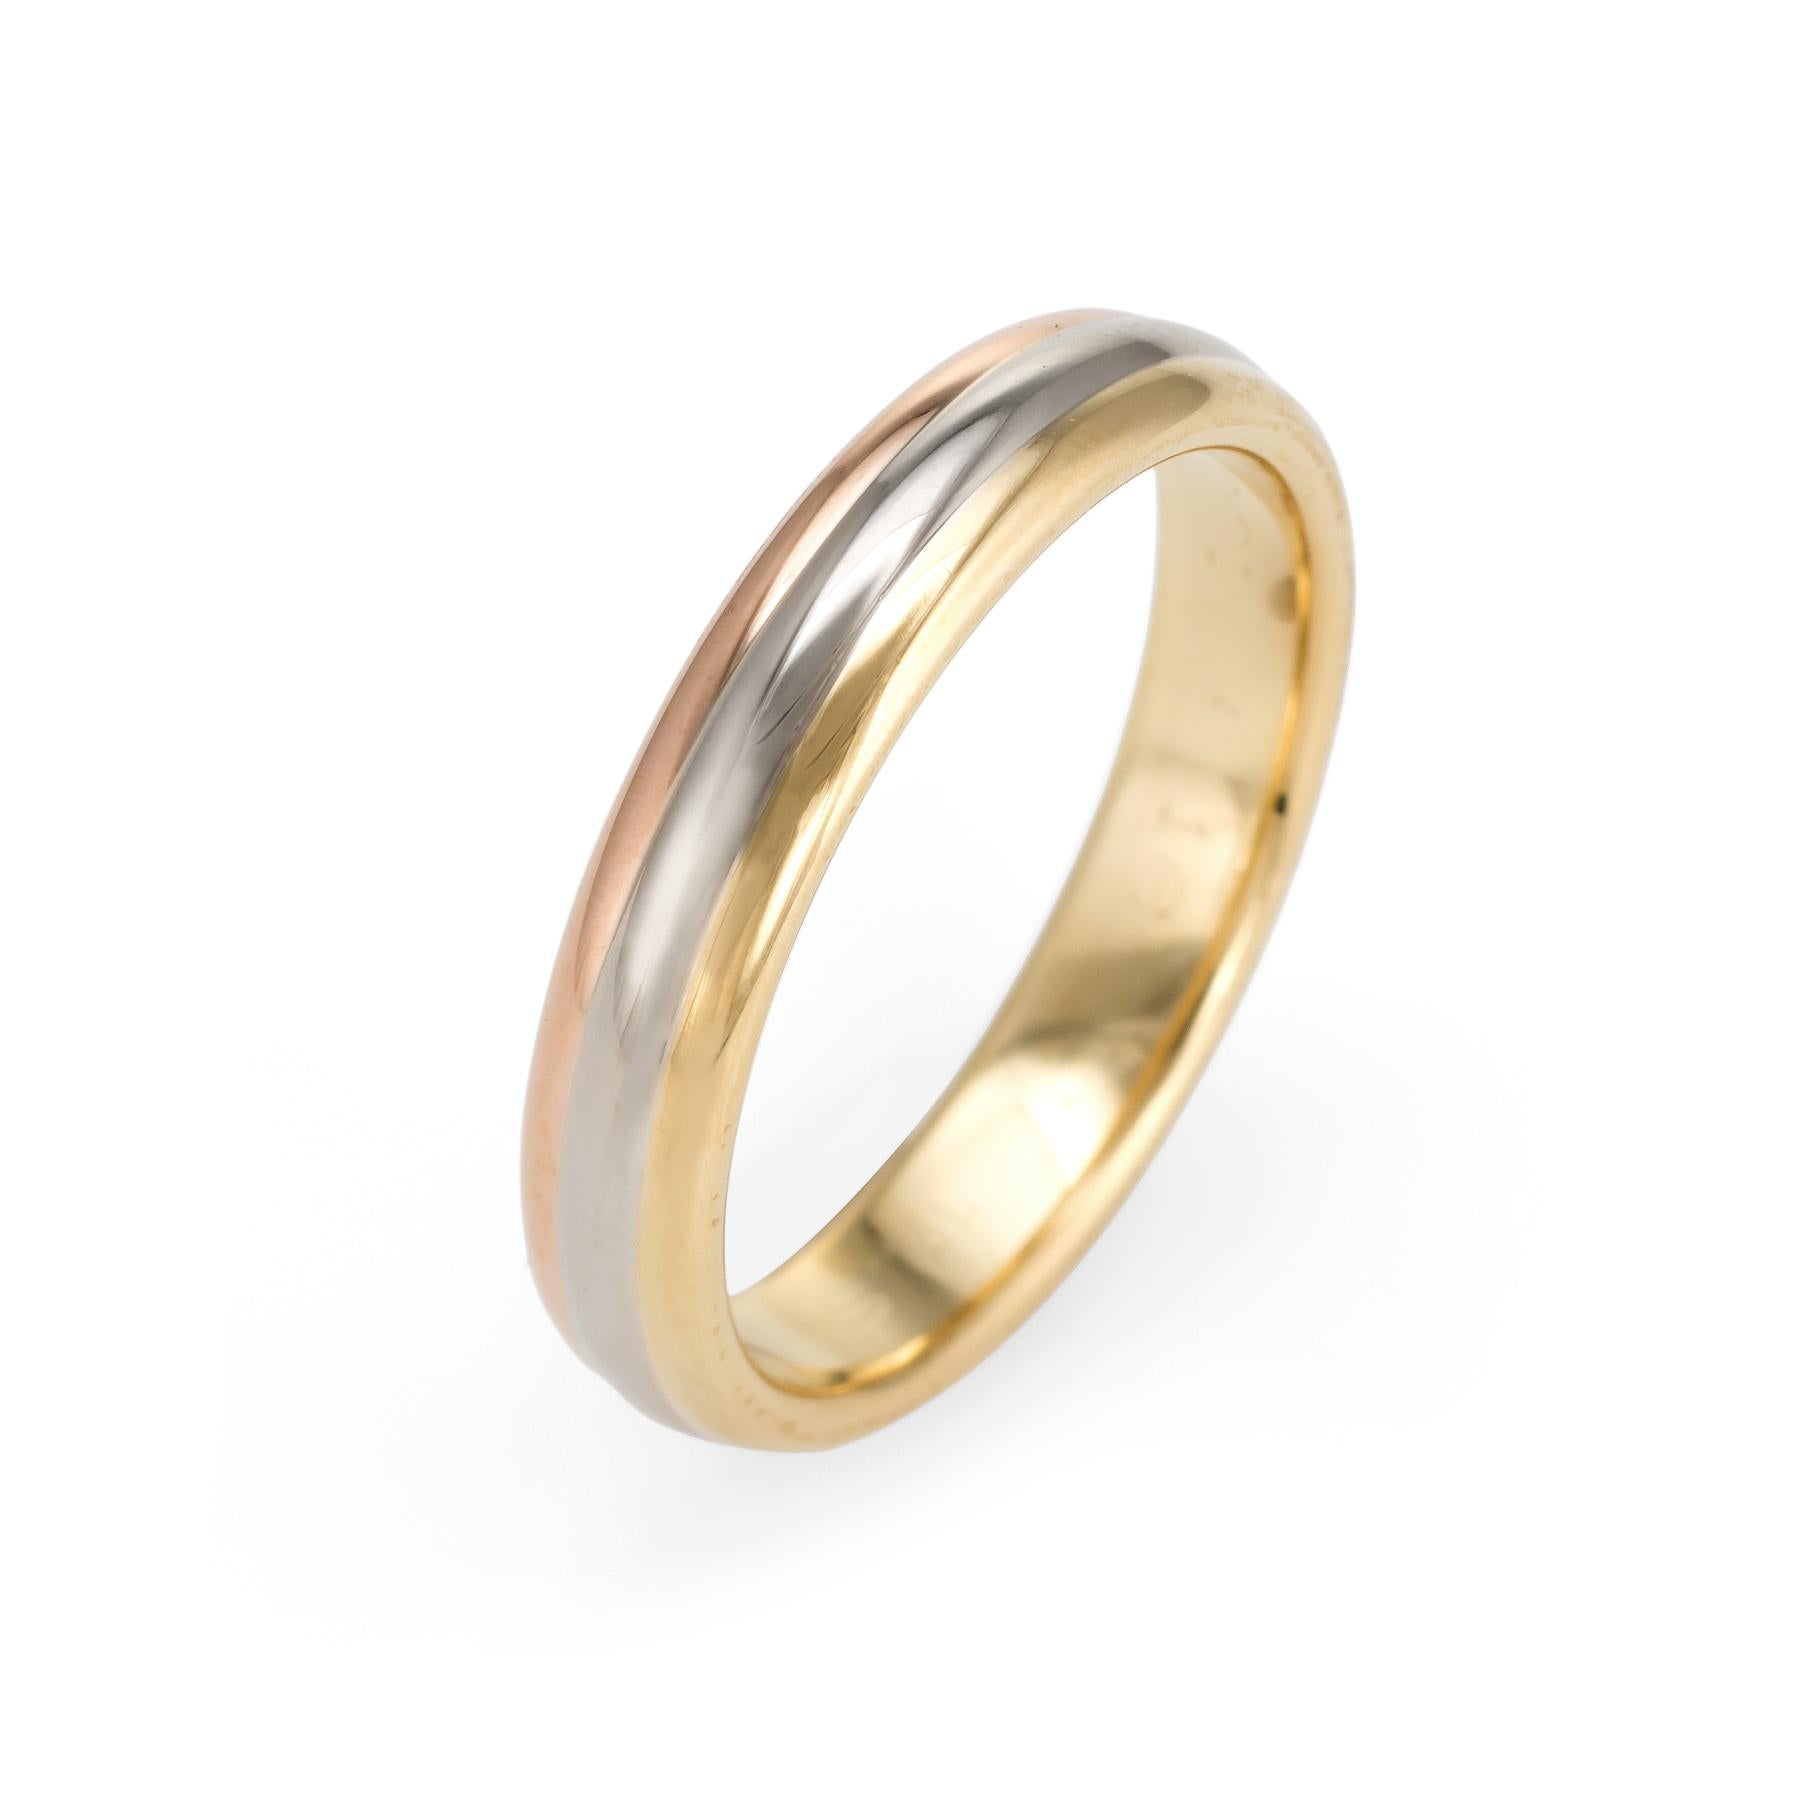 Cartier tri-gold ring, crafted in 18 karat yellow, white & rose gold.  

Circa 1998 the ring is a retired piece and no longer available for sale at retail.

The ring is in excellent condition and was recently professionally cleaned and polished. No